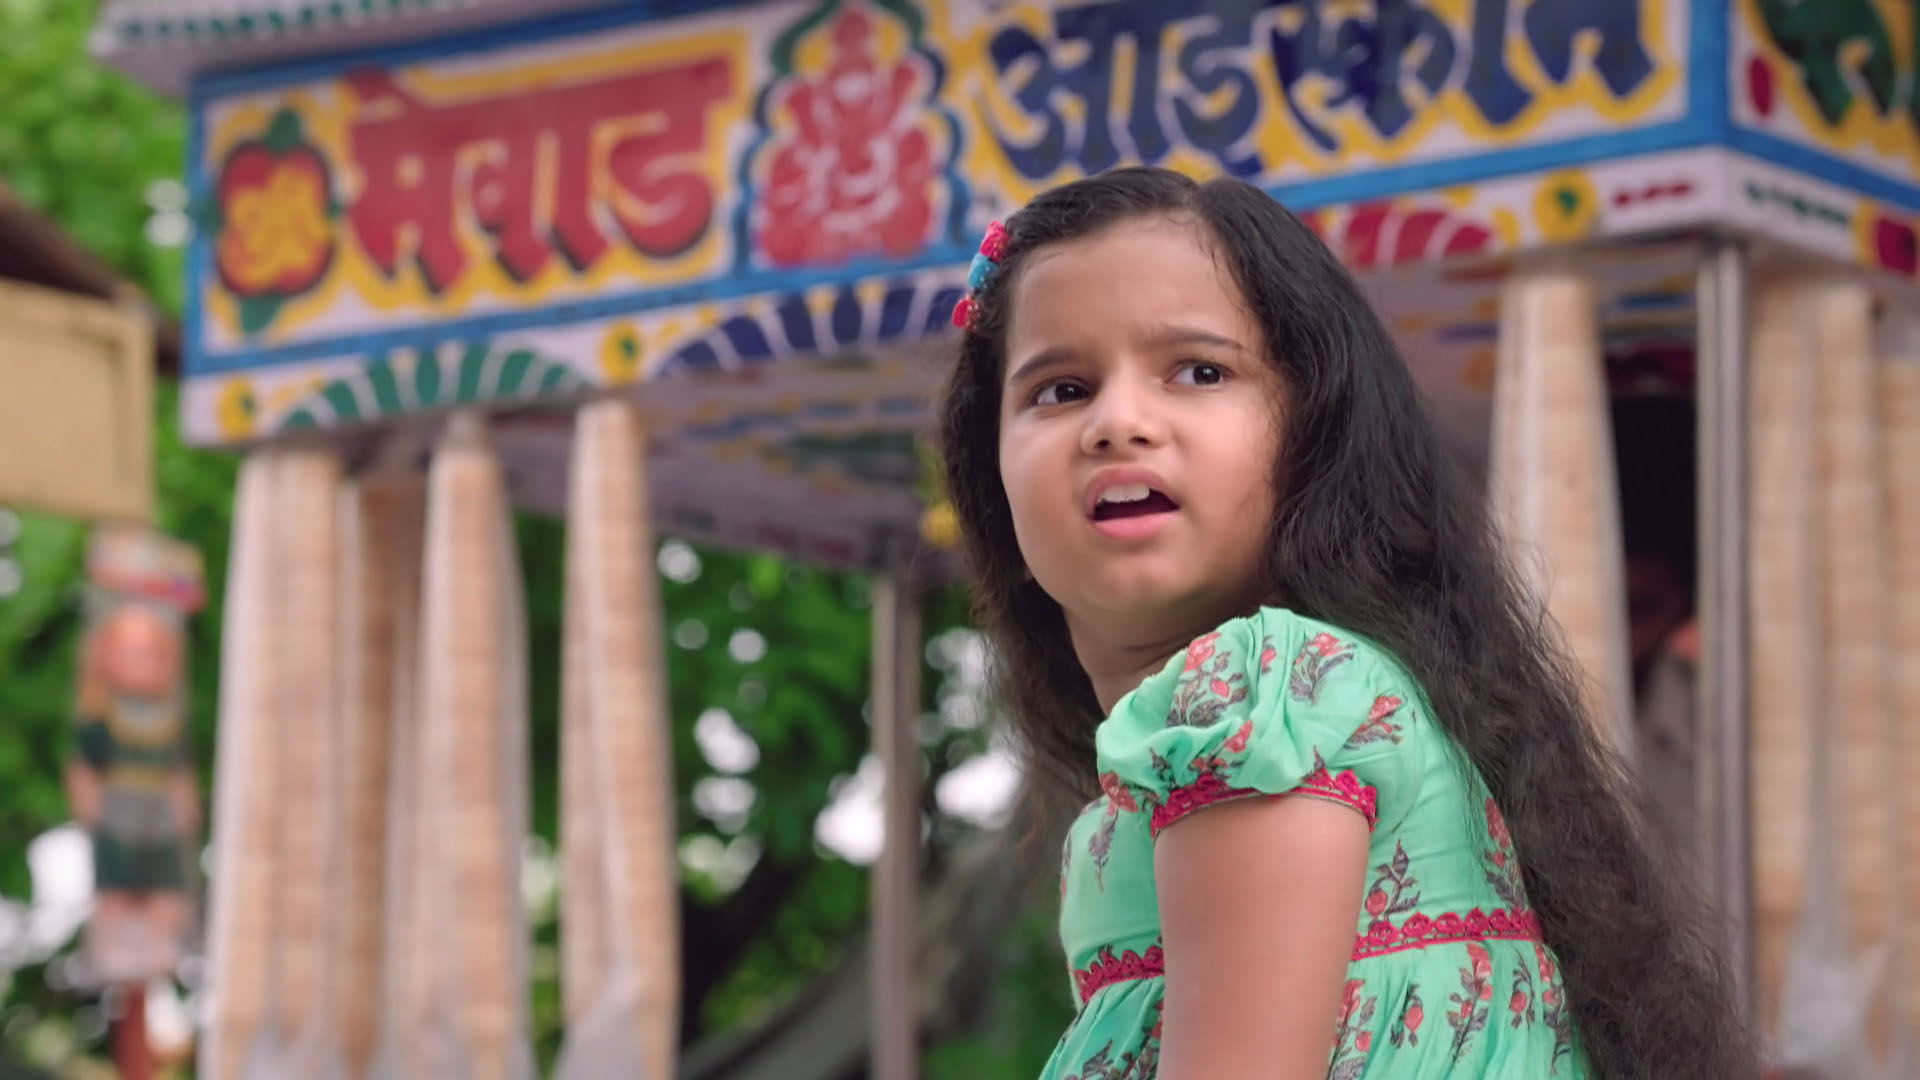 What Is in Store for Muskaan?